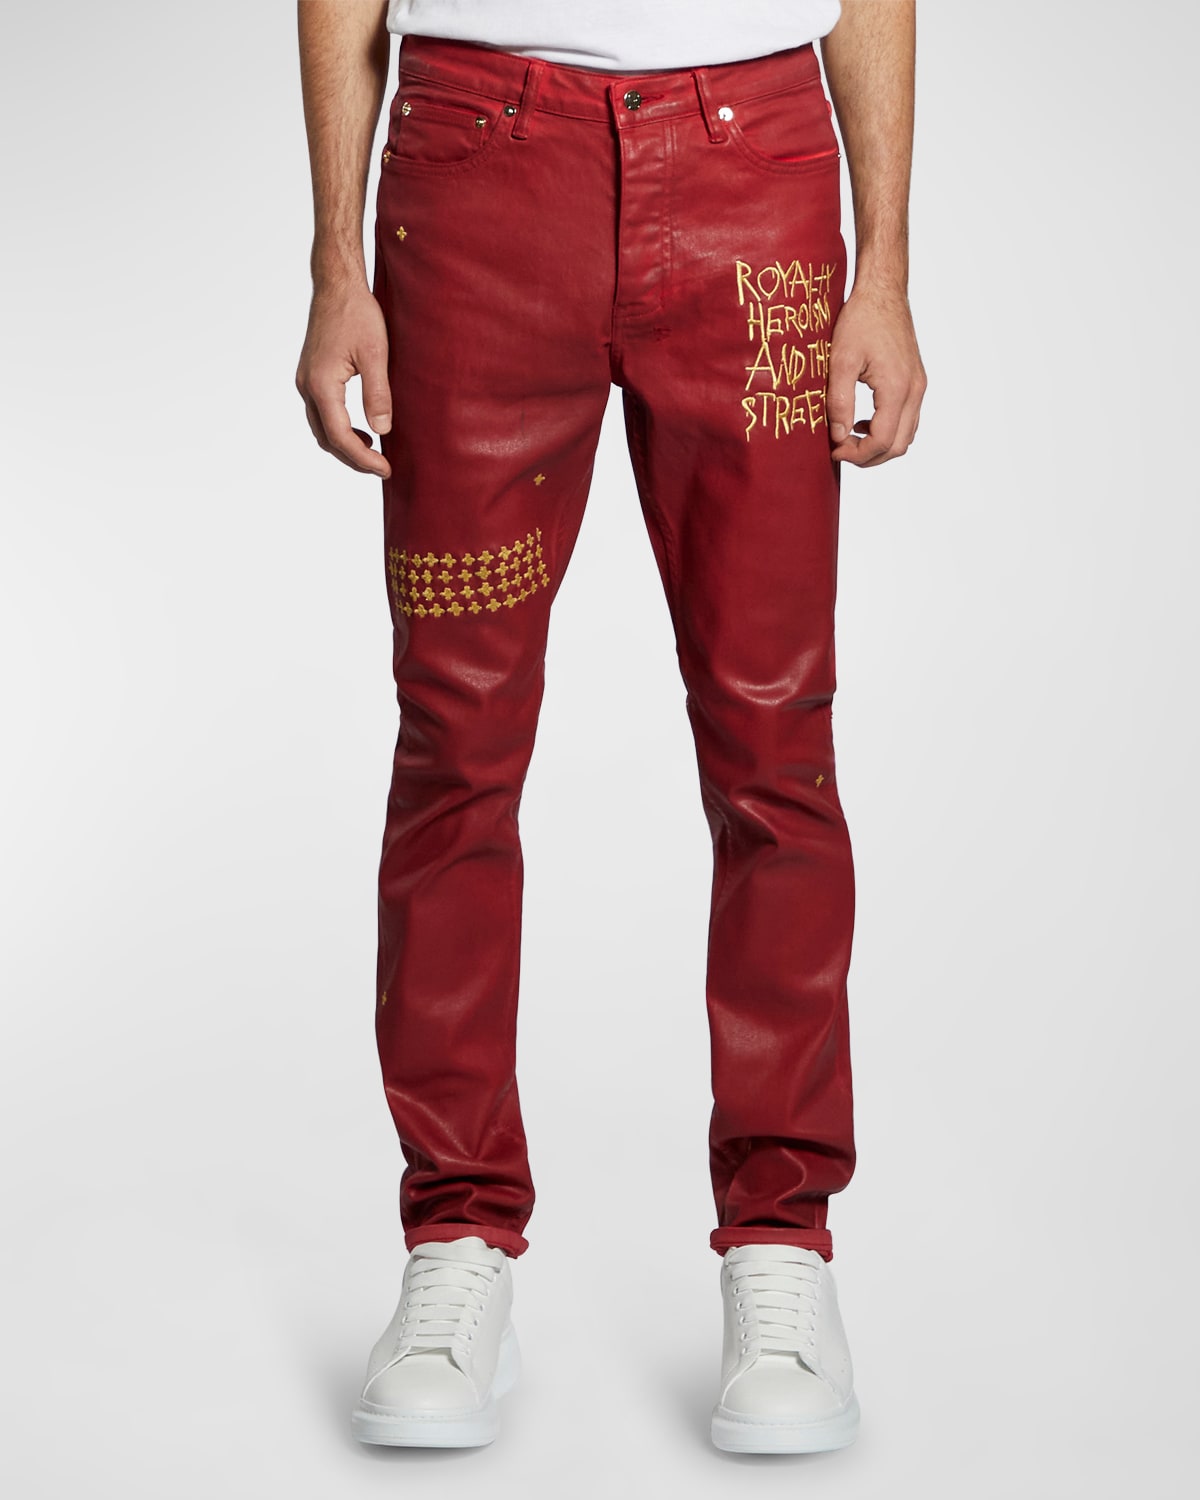 Men's 23 Chitch Embroidered Coated Jeans